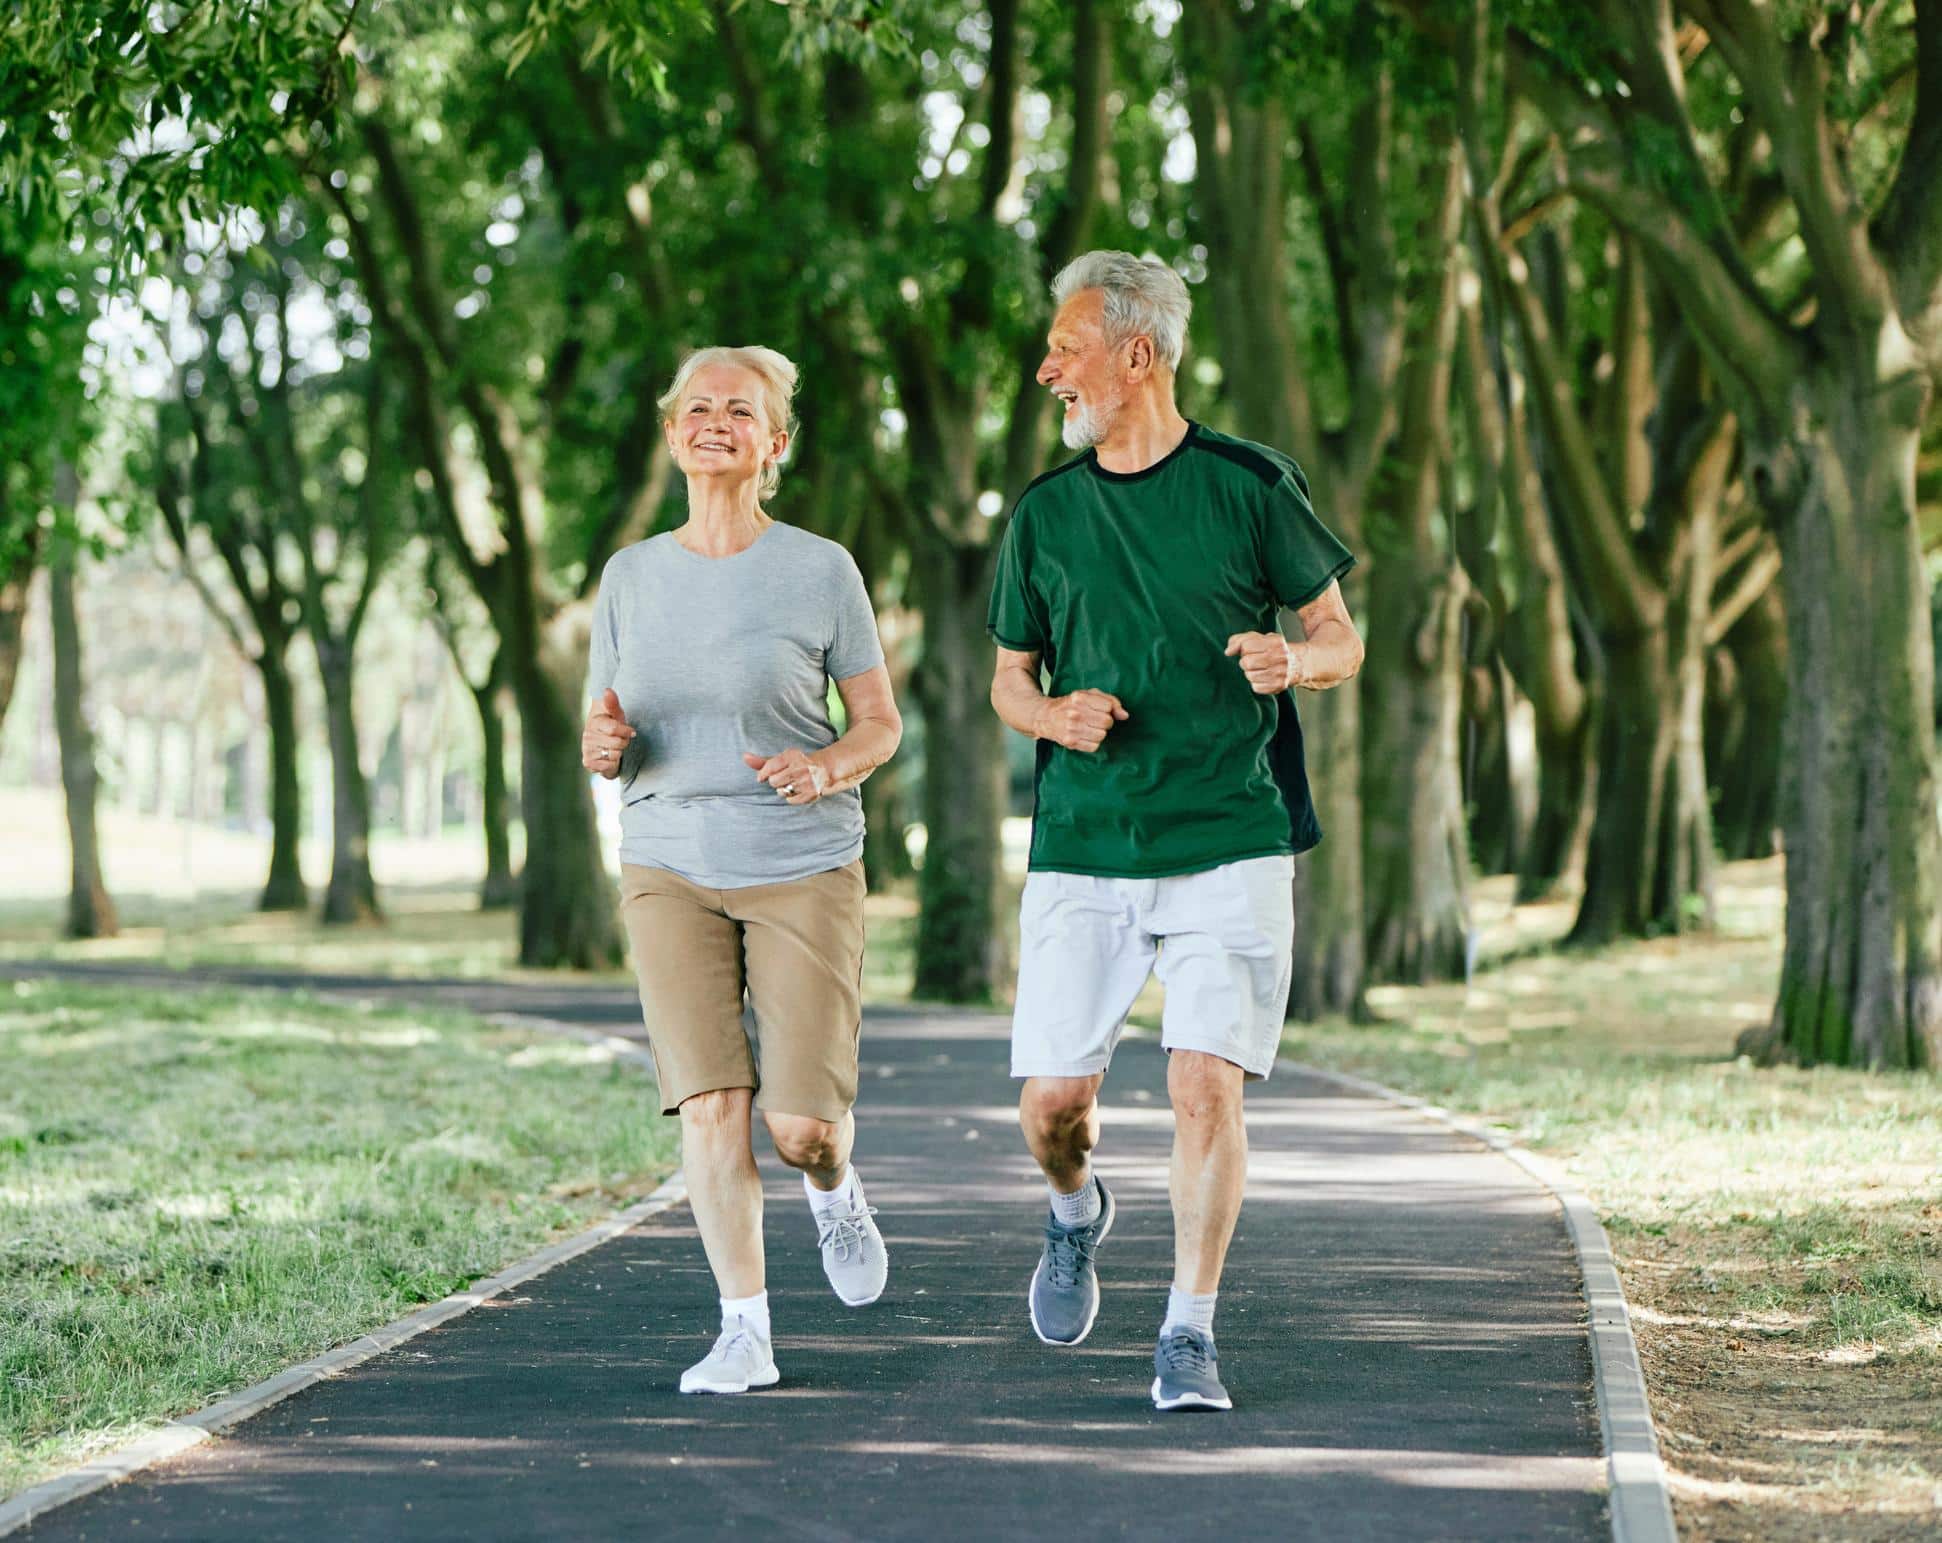 Mature white woman and man jog along path through cluster of trees as they chat.